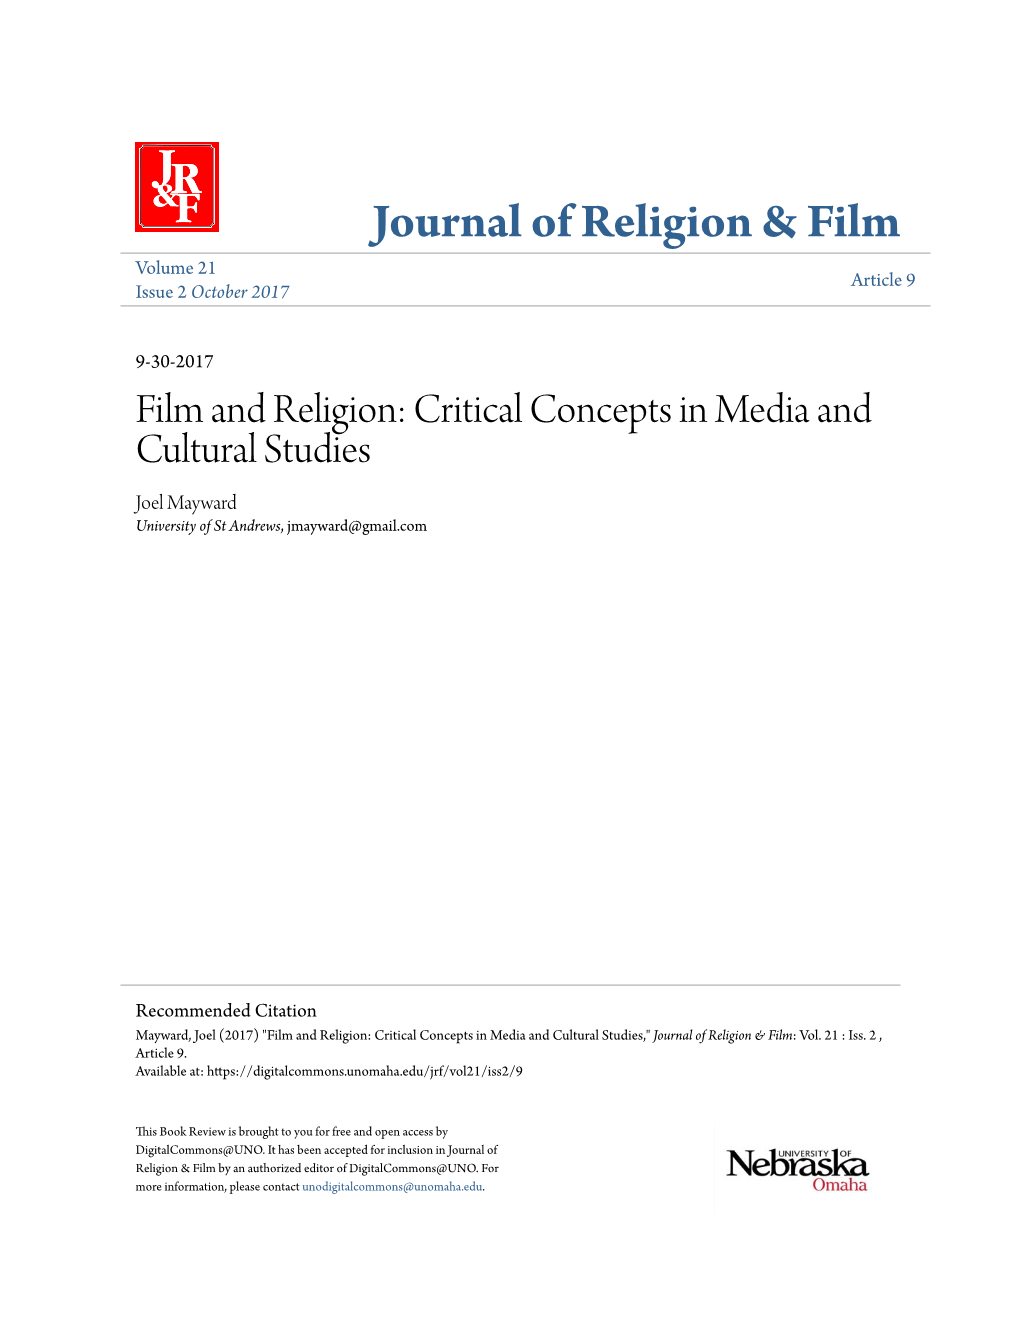 Film and Religion: Critical Concepts in Media and Cultural Studies Joel Mayward University of St Andrews, Jmayward@Gmail.Com